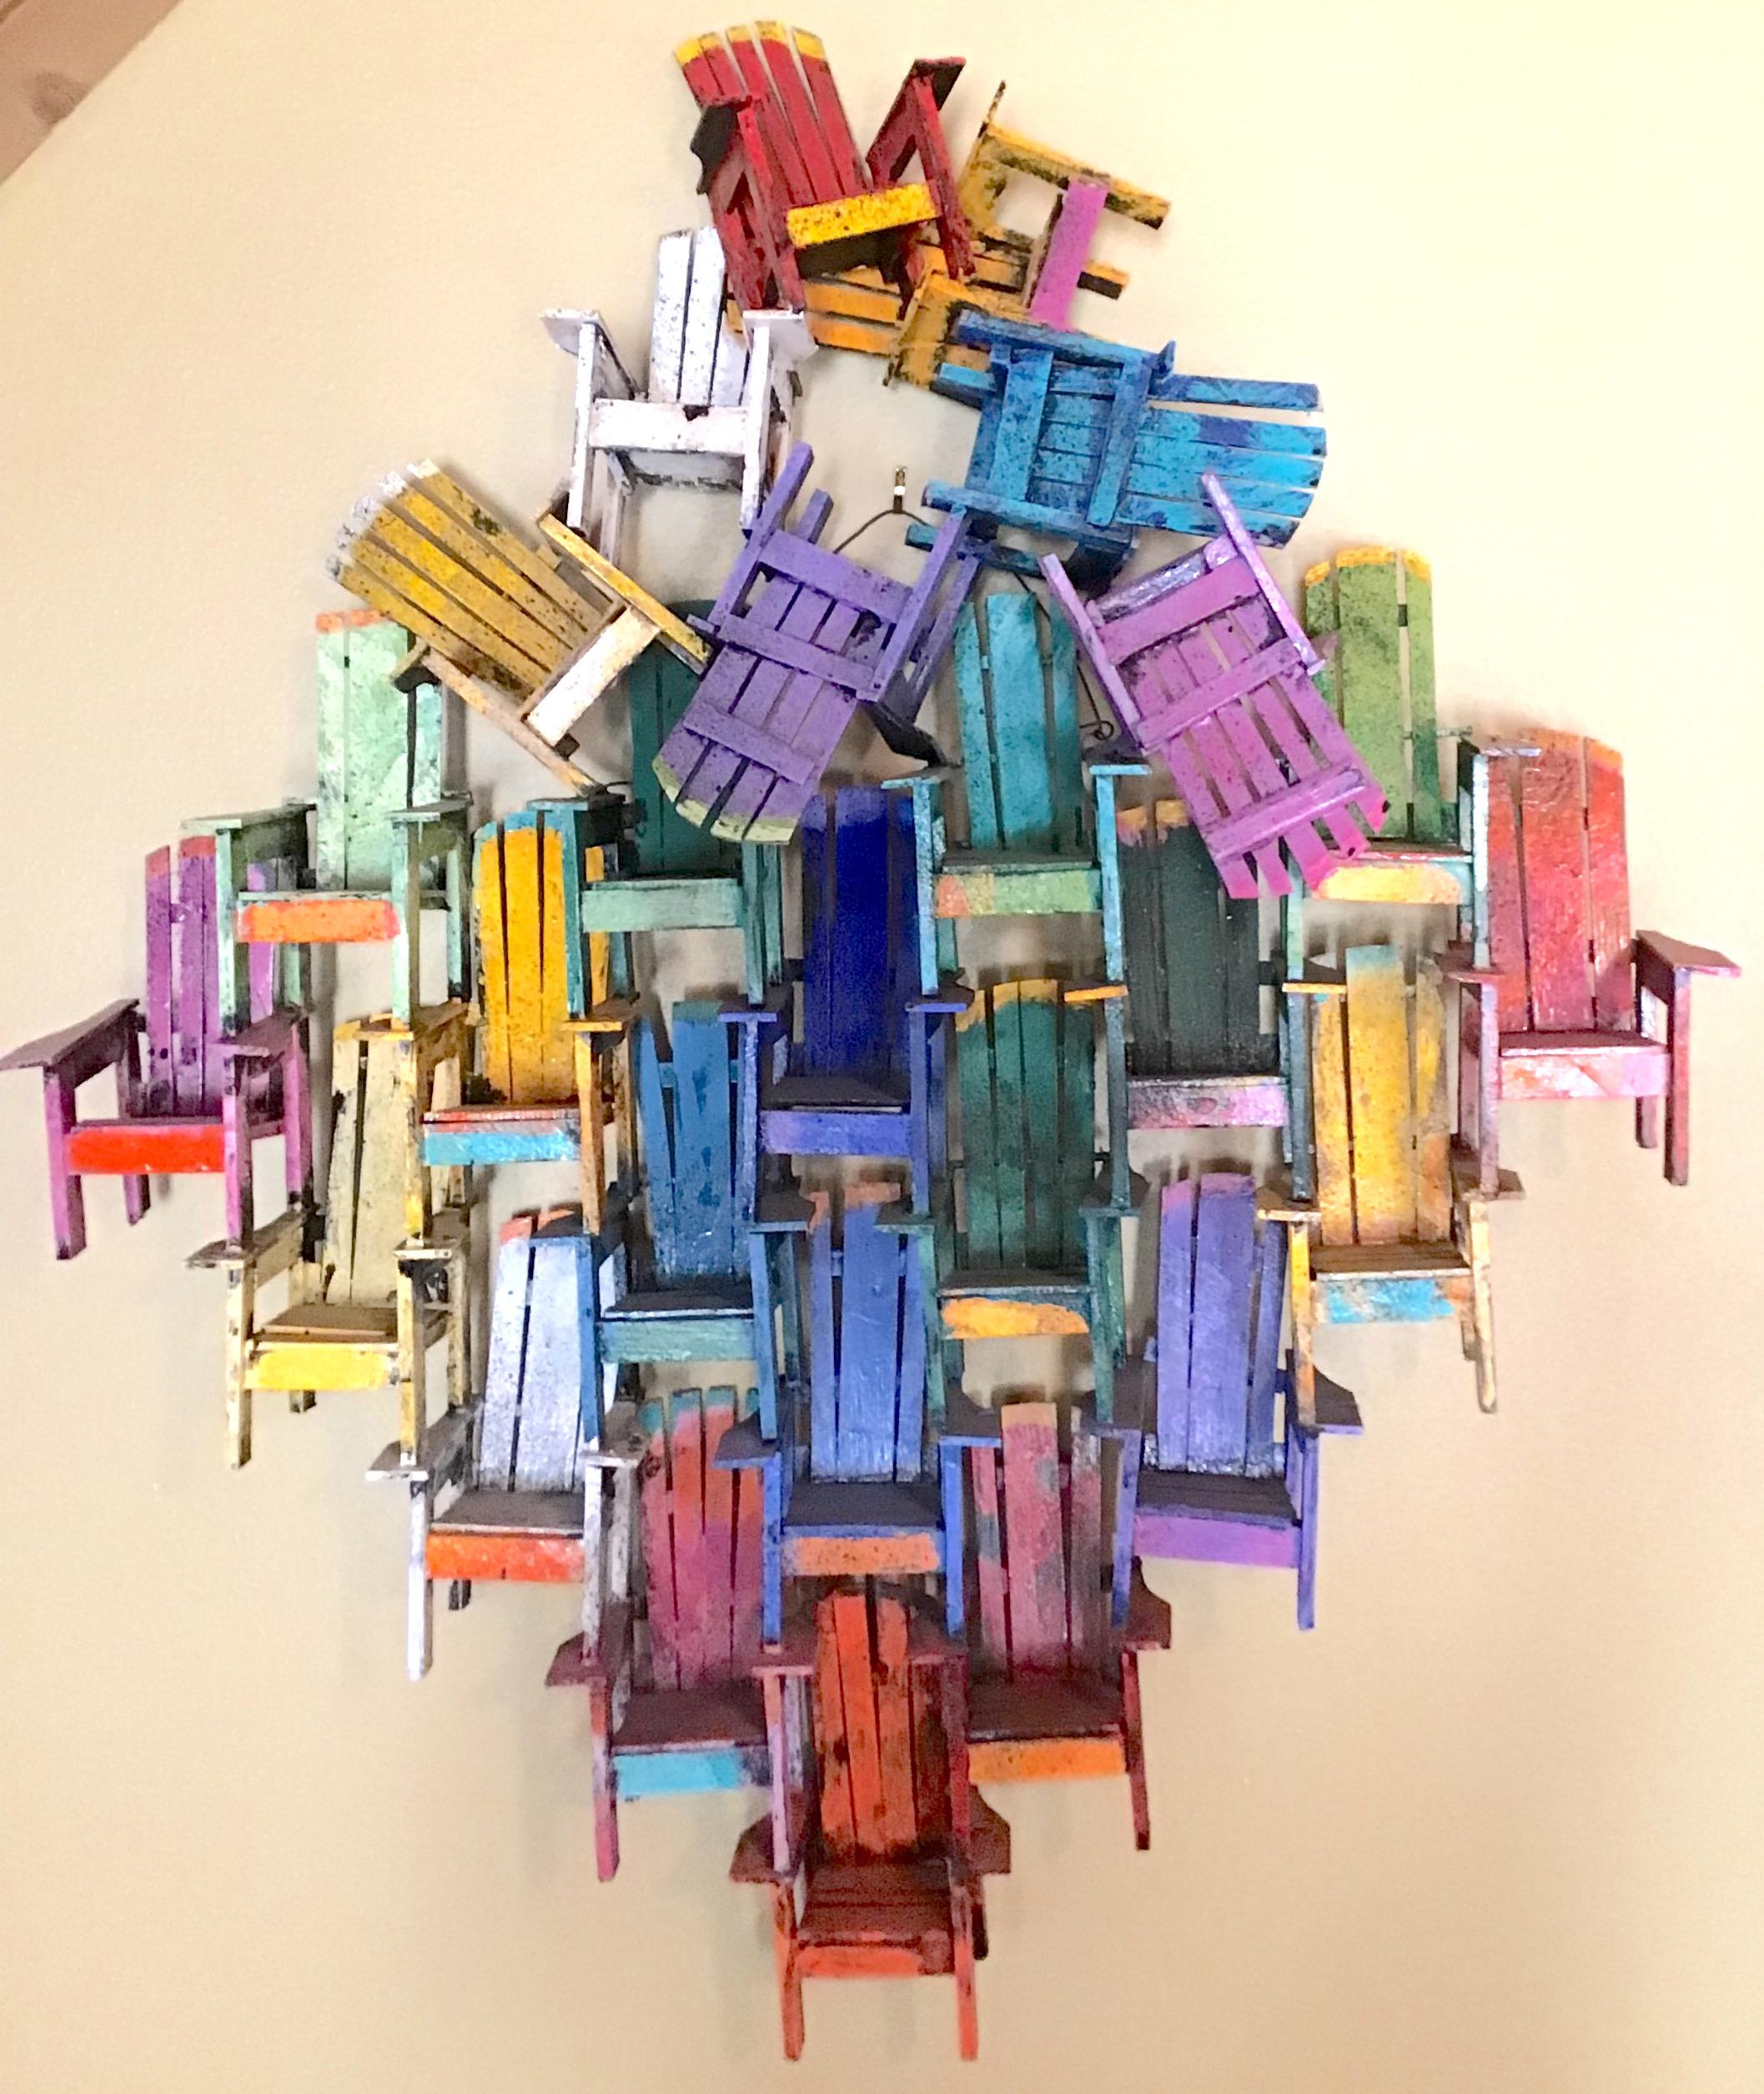 Colorful Adirondack chair wall sculpture

Paul Jacobsen used everyday objects, such as chairs, cars, airplanes, trains, motorcycles and puzzles, all built from scratch, and turns them into very desirable works of art. Among his most famous works